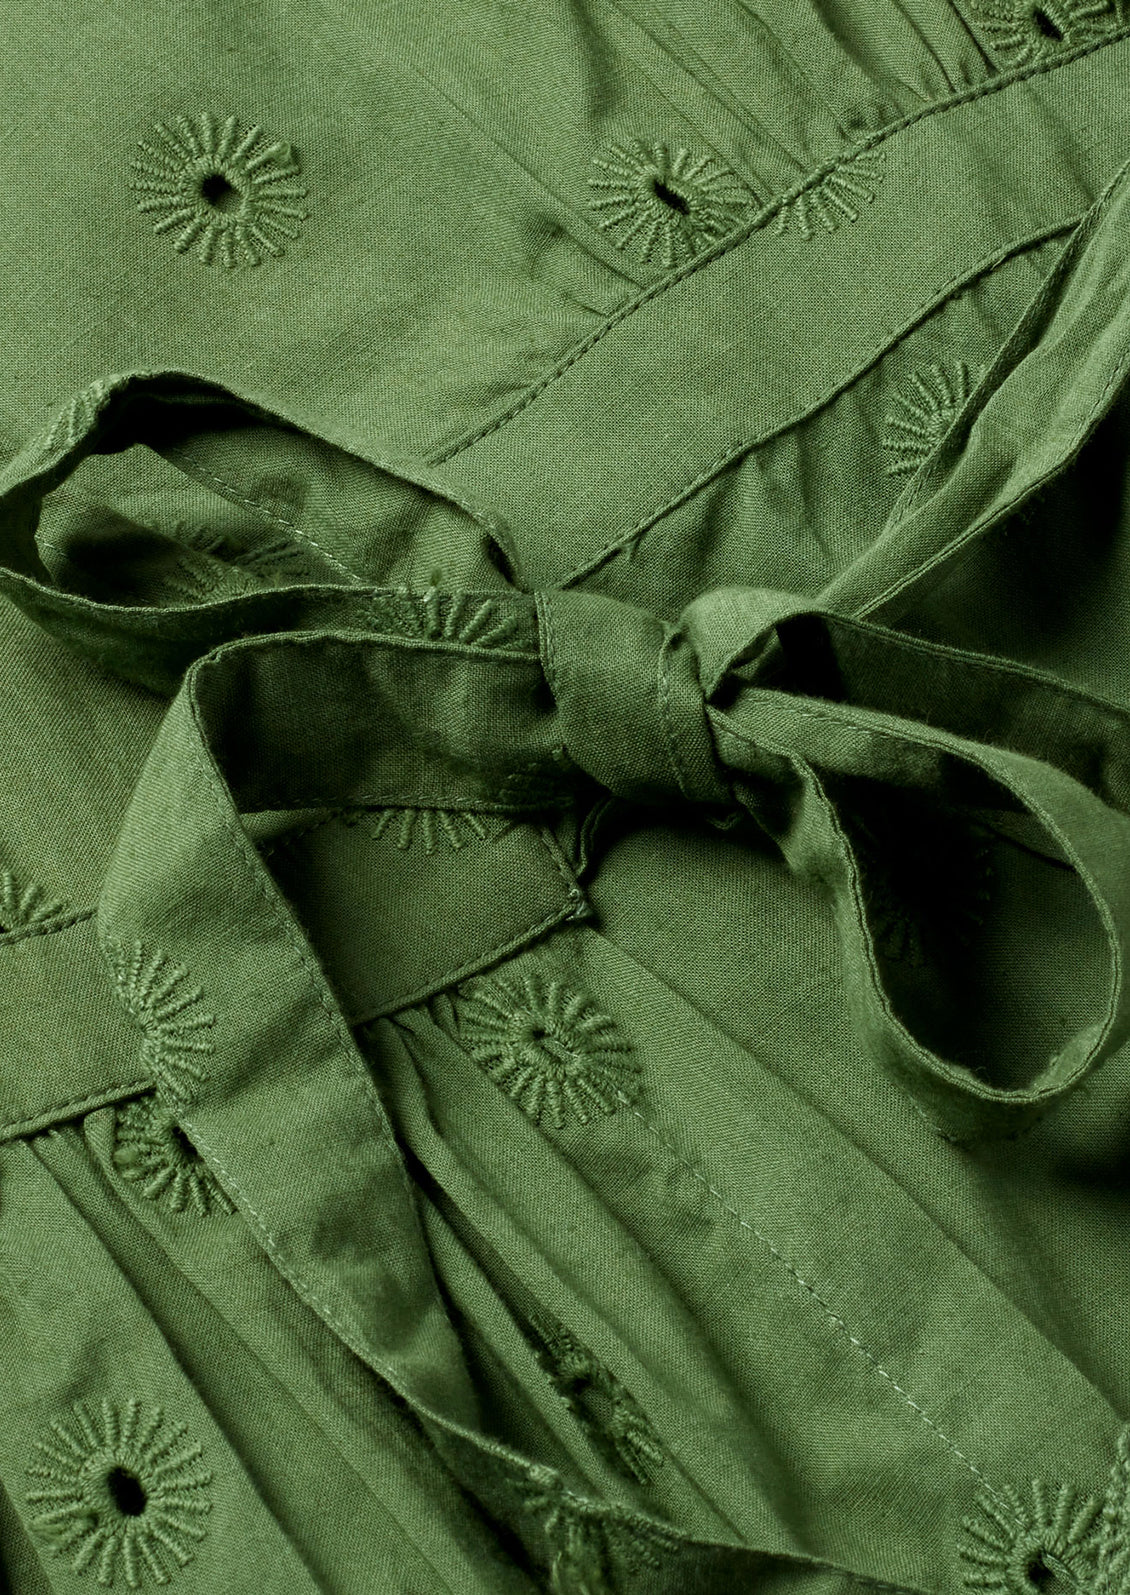 Green cotton with tie closure and sun-shaped eyelet embroidery.